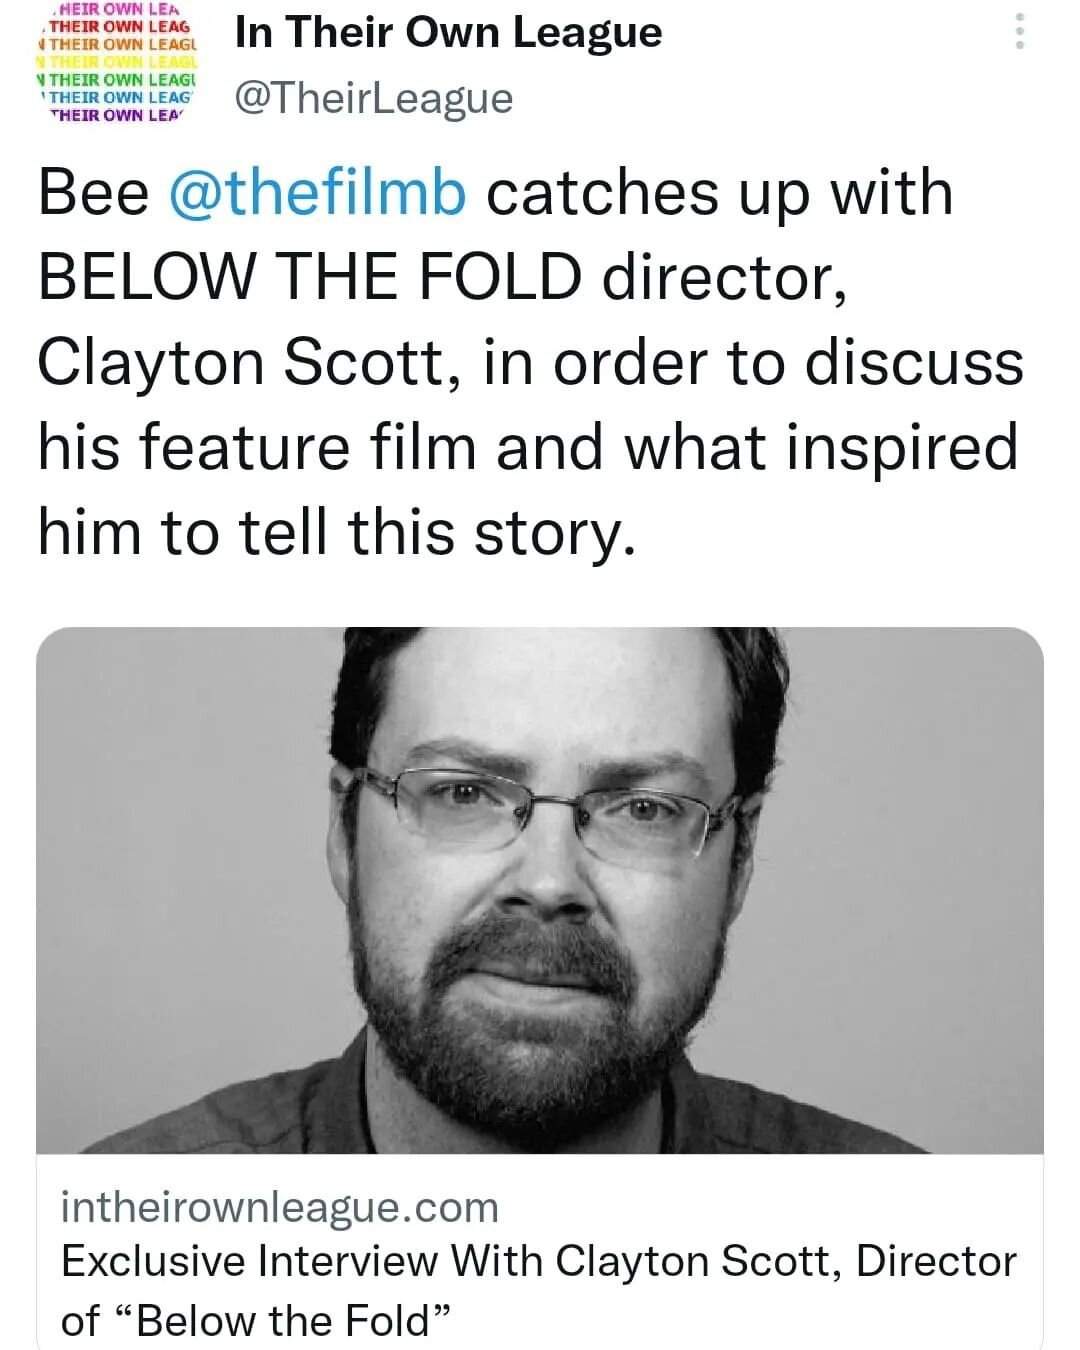 Check out this interview with Writer/Director Clayton Scott on the making of Below the Fold! 

Link to the interview in our bio.

#belowthefoldmovie